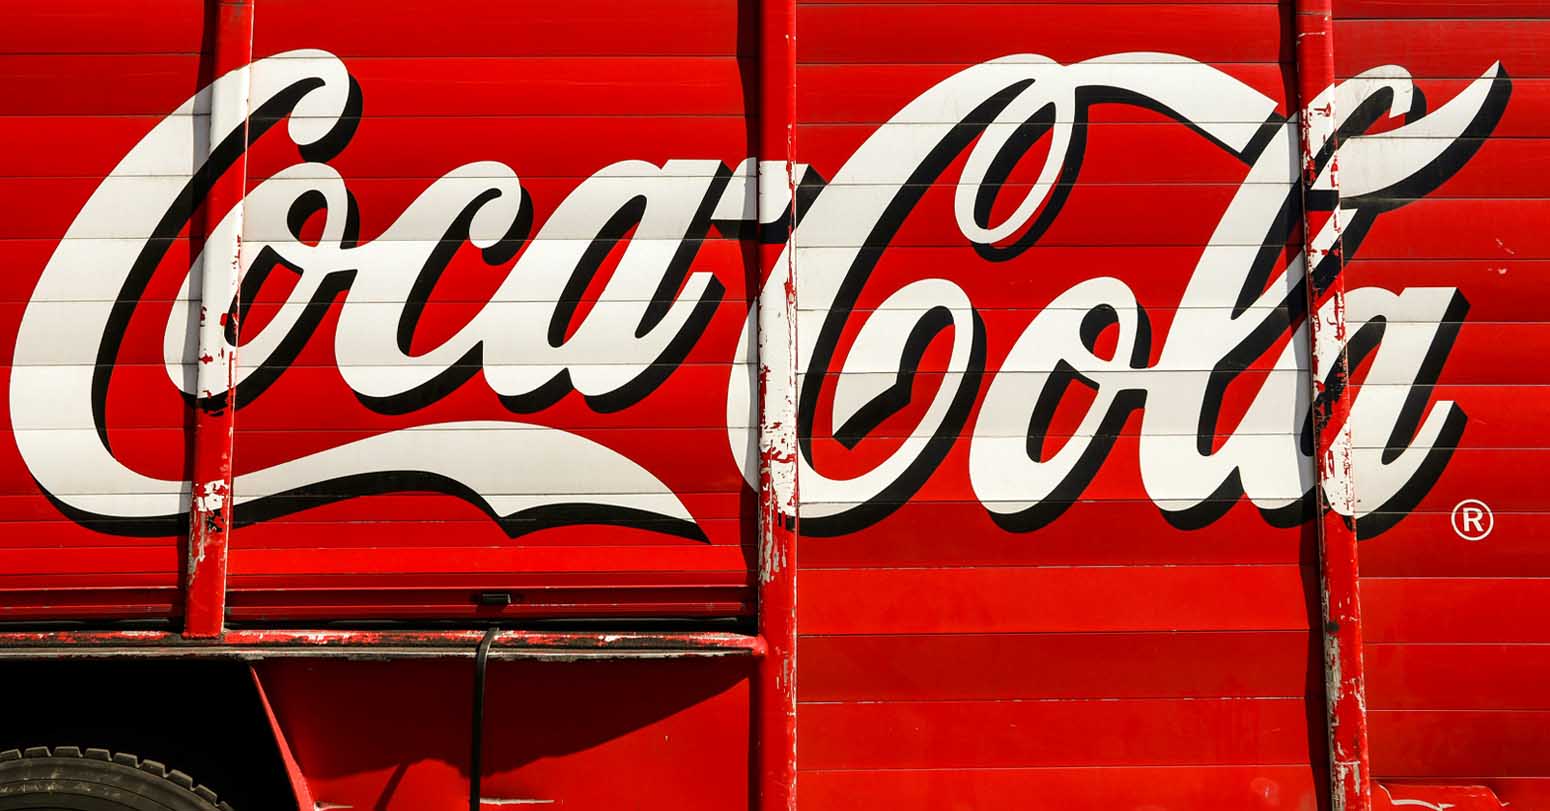 Coca-Cola World's Largest Producer Of Branded Plastic Pollution: Research